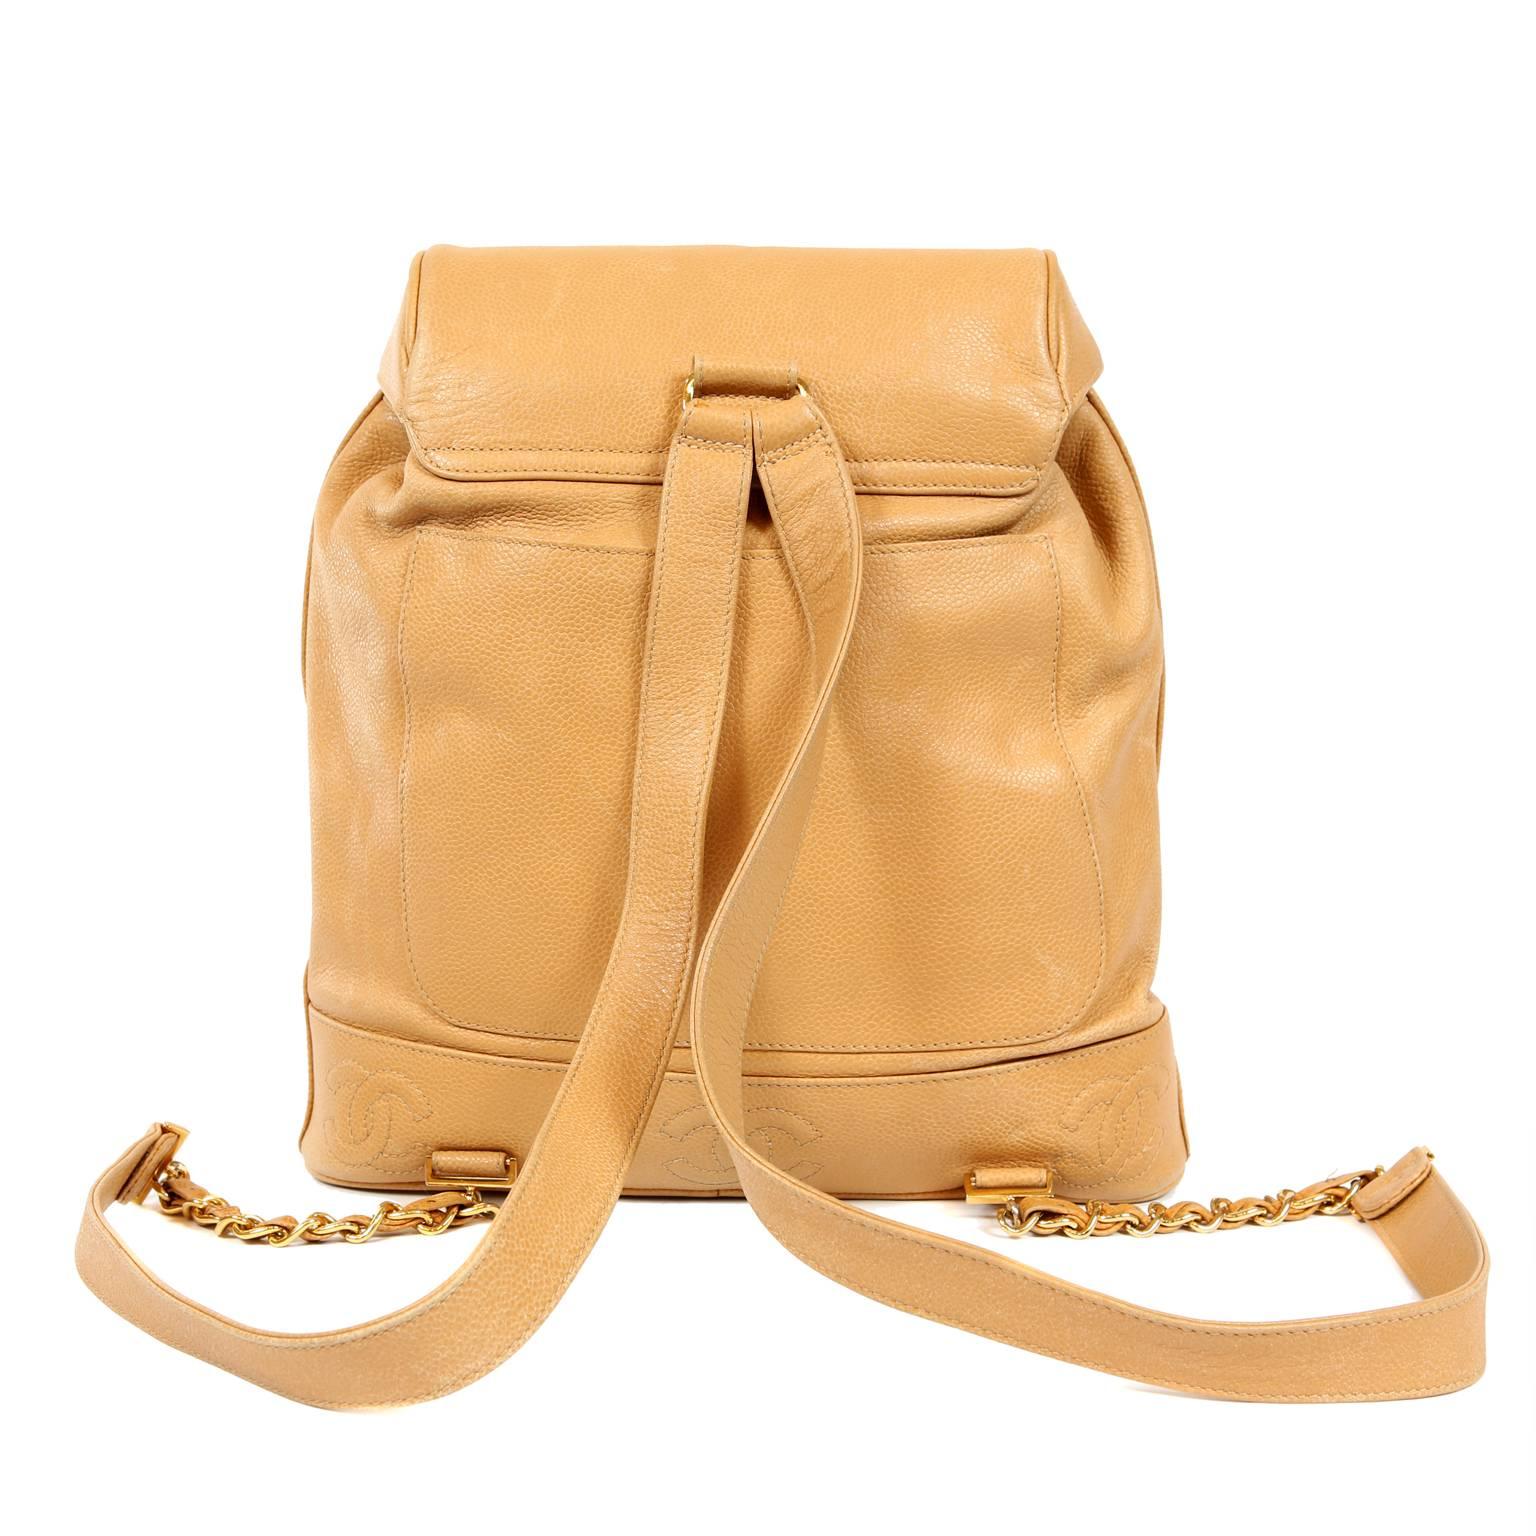 Chanel Camel Caviar Leather Backpack- Excellent Plus Condition
 An amazing vintage piece, it is both stylish and practical. 
Durable and textured camel caviar leather large backpack with gold hardware accents.  Top flap closure has large gold